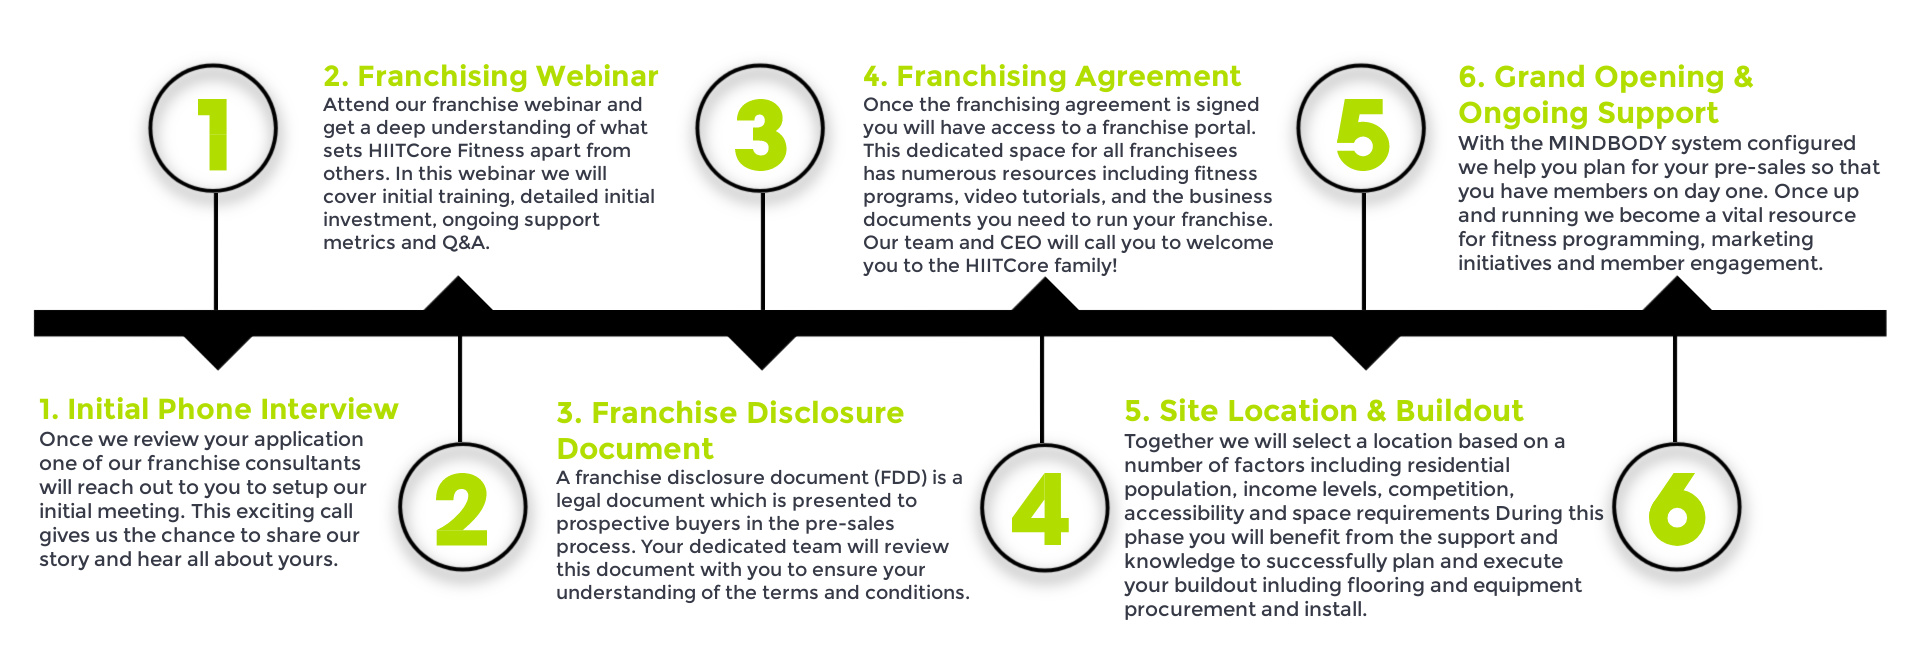 Franchise Launch Timeline including steps for starting the franchisee process. Detailed information including Initial Phone Interview, Franchise Webinar, Franchise Disclosure Document, Franchising Agreement, Site Location & Buildout, and Grand Opening & Ongoing Support.